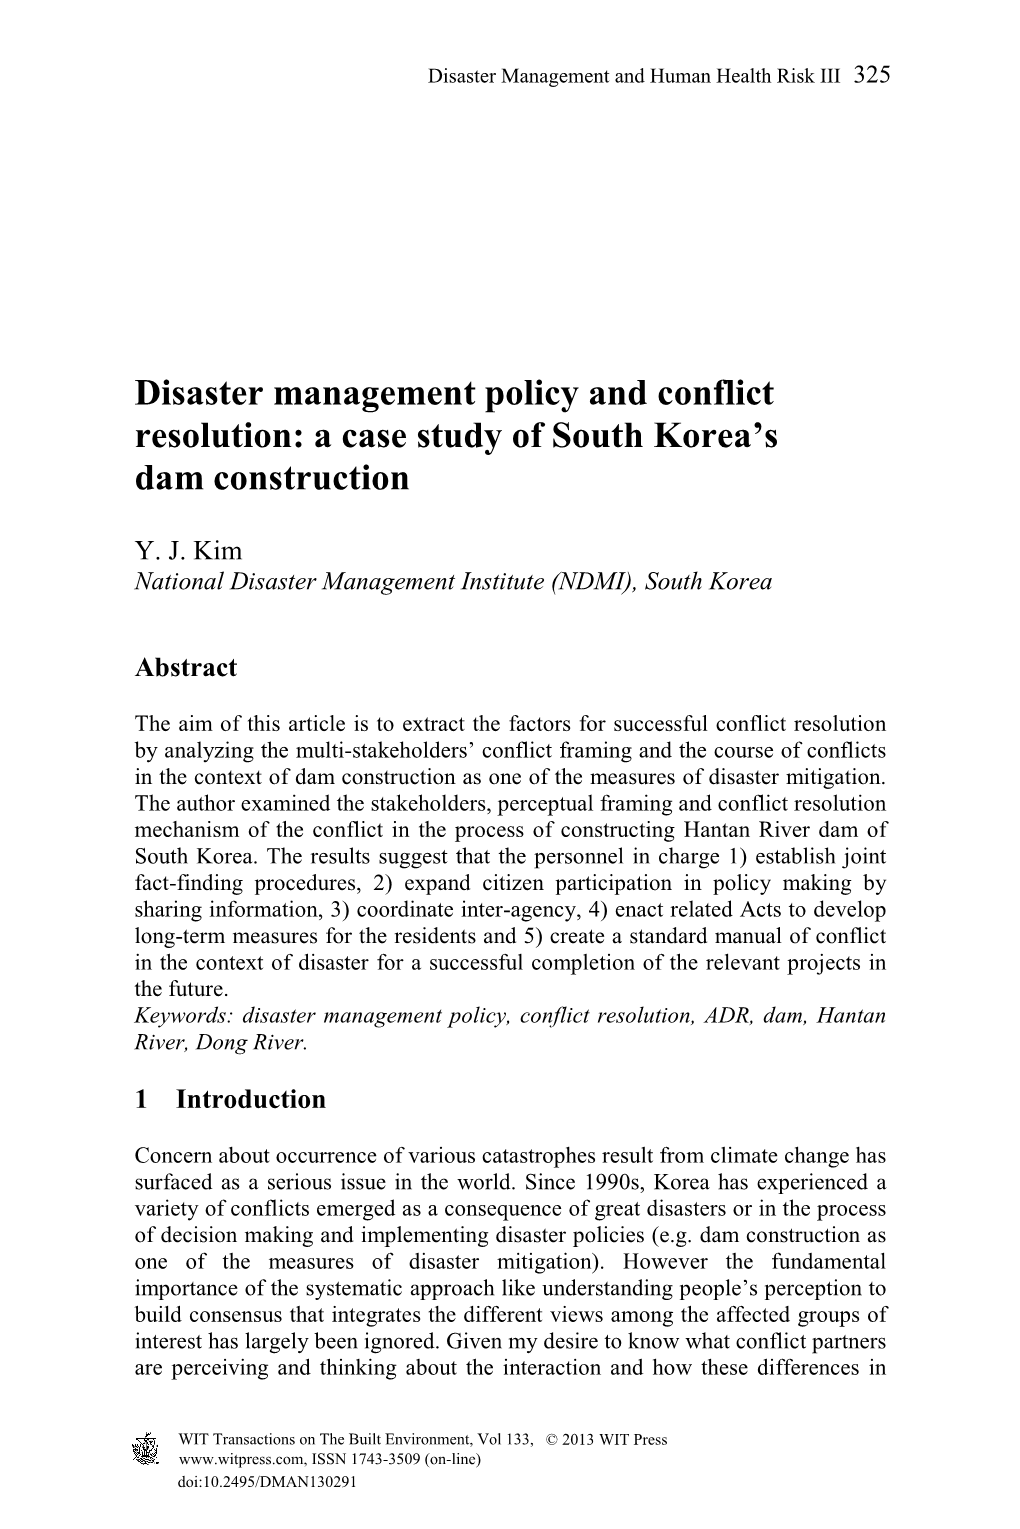 Disaster Management Policy and Conflict Resolution: a Case Study of South Korea’S Dam Construction